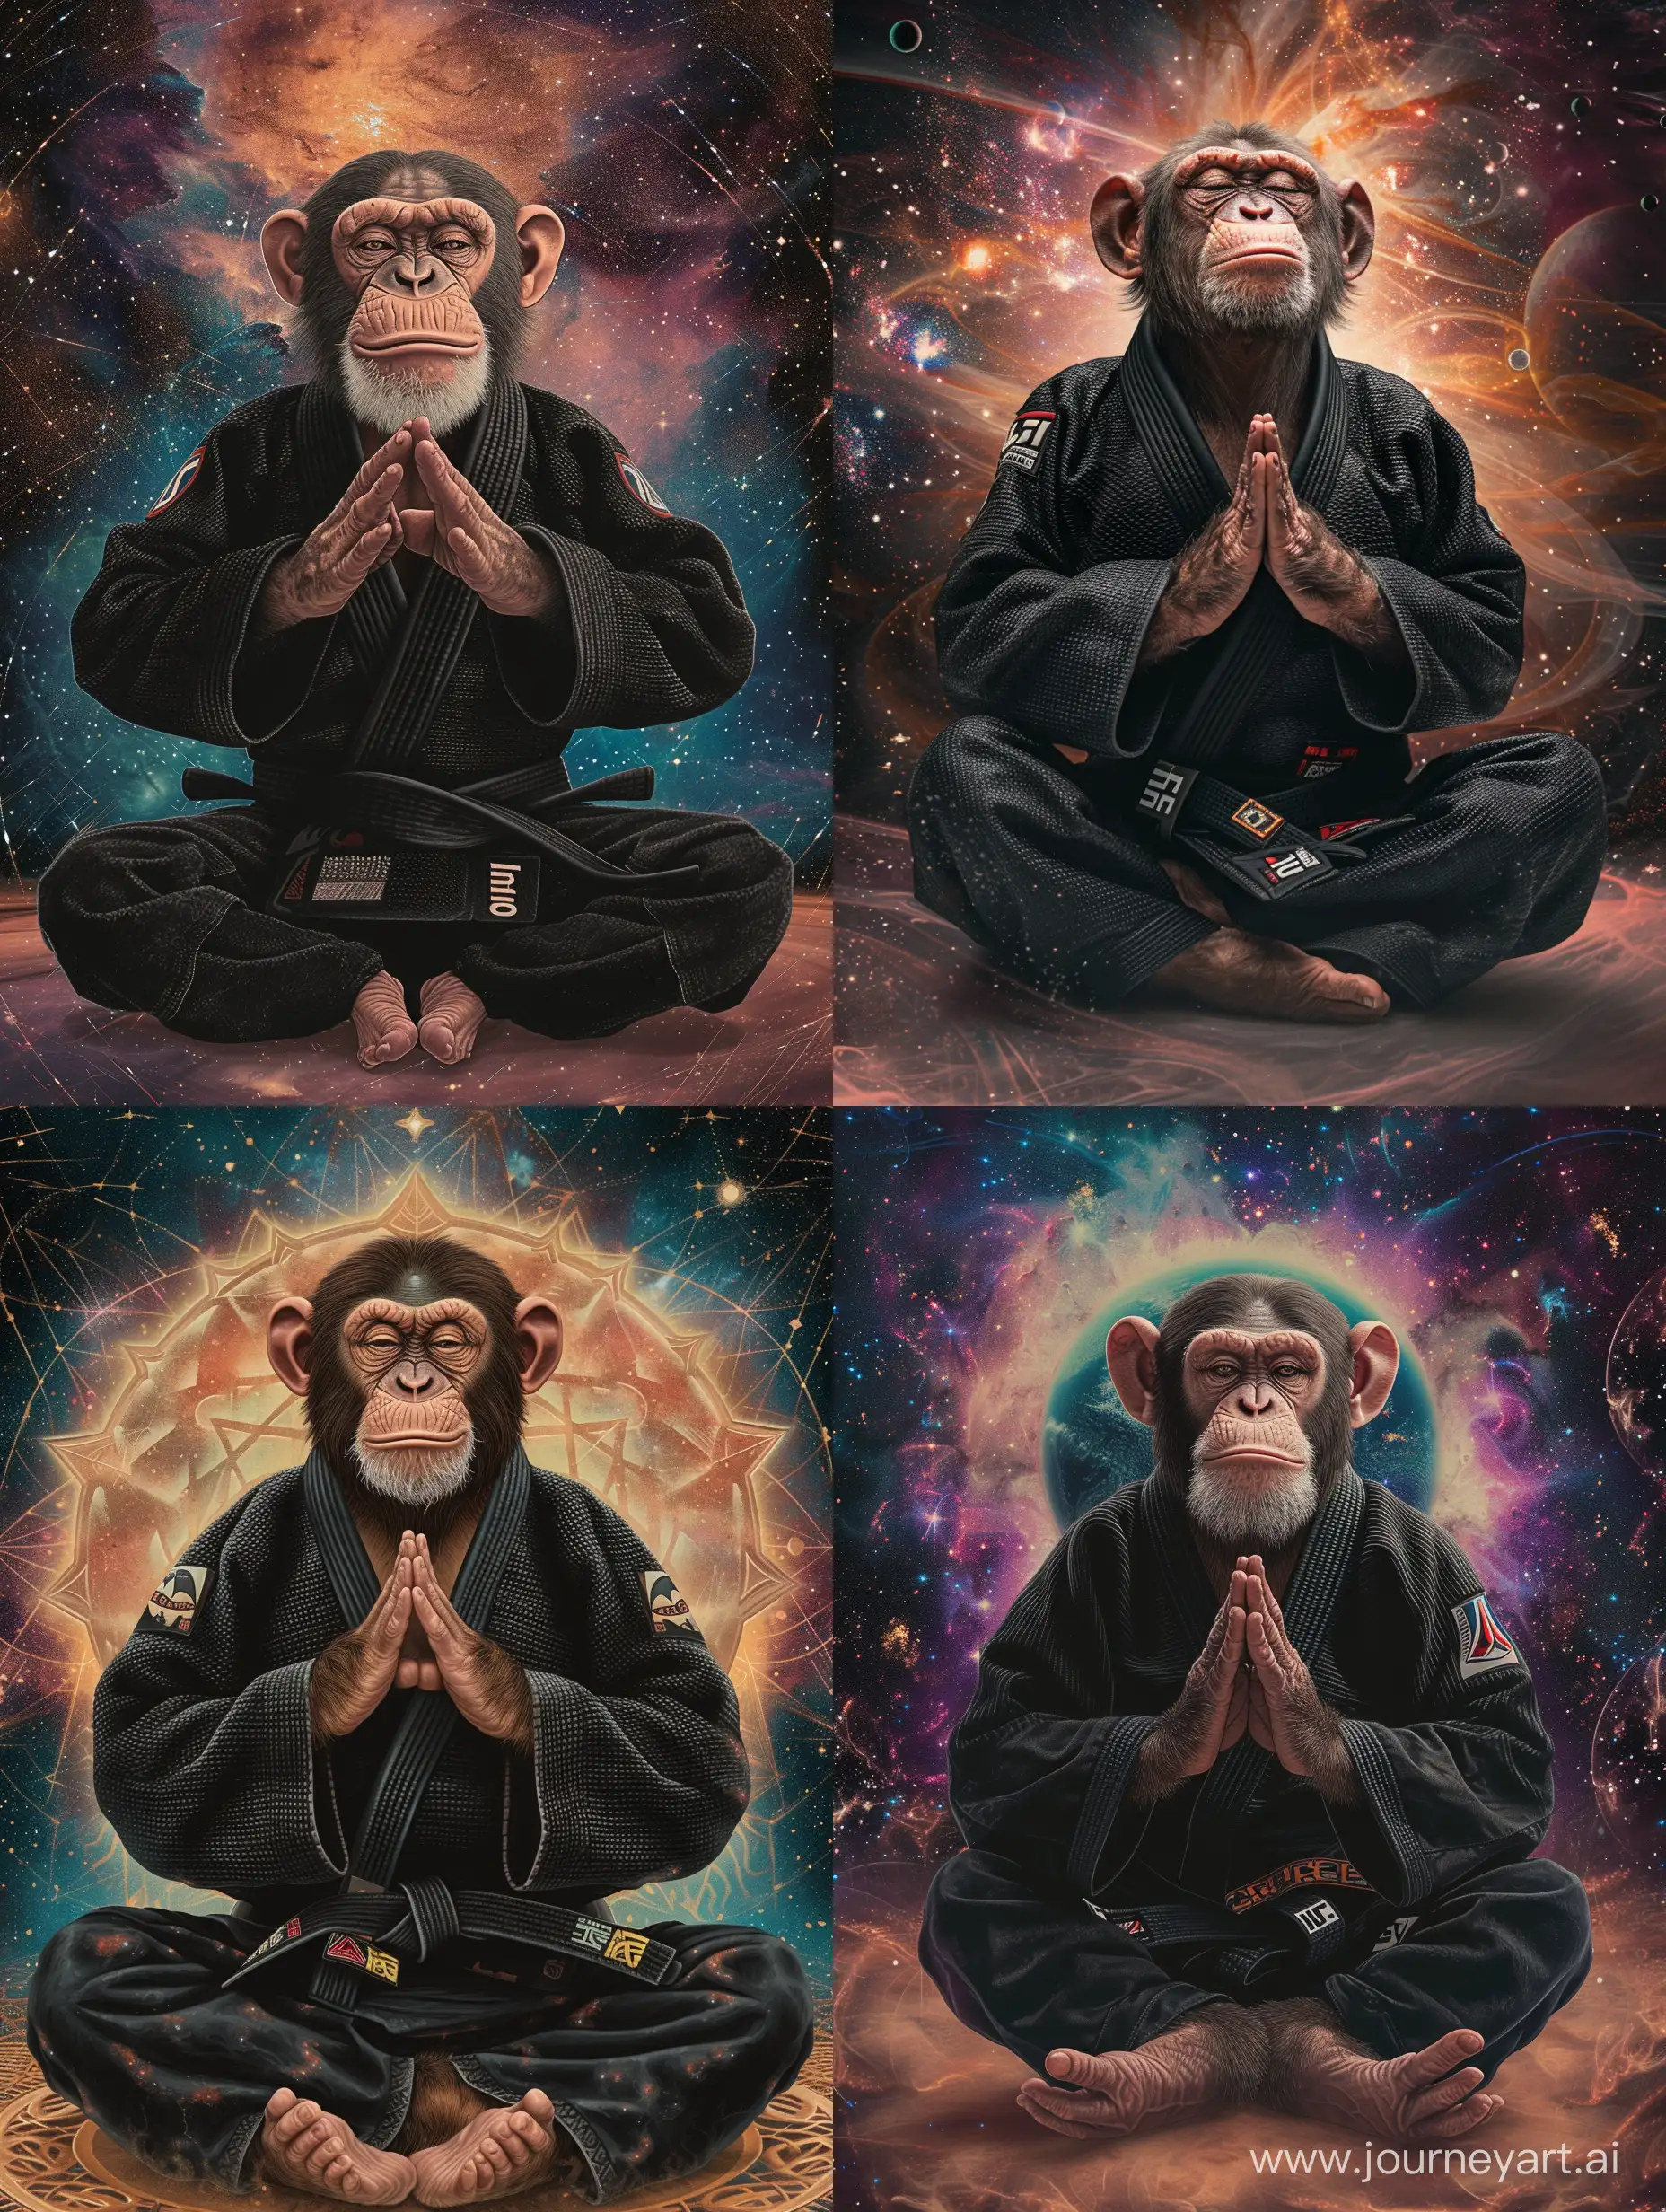 A monkey wearing a black Brazilian jiu jitsu gi. He is meditating with his legs crossed and hands in a praying position. He has a sinister sneaky grin on his face. He is looking at the viewer, cosmic background